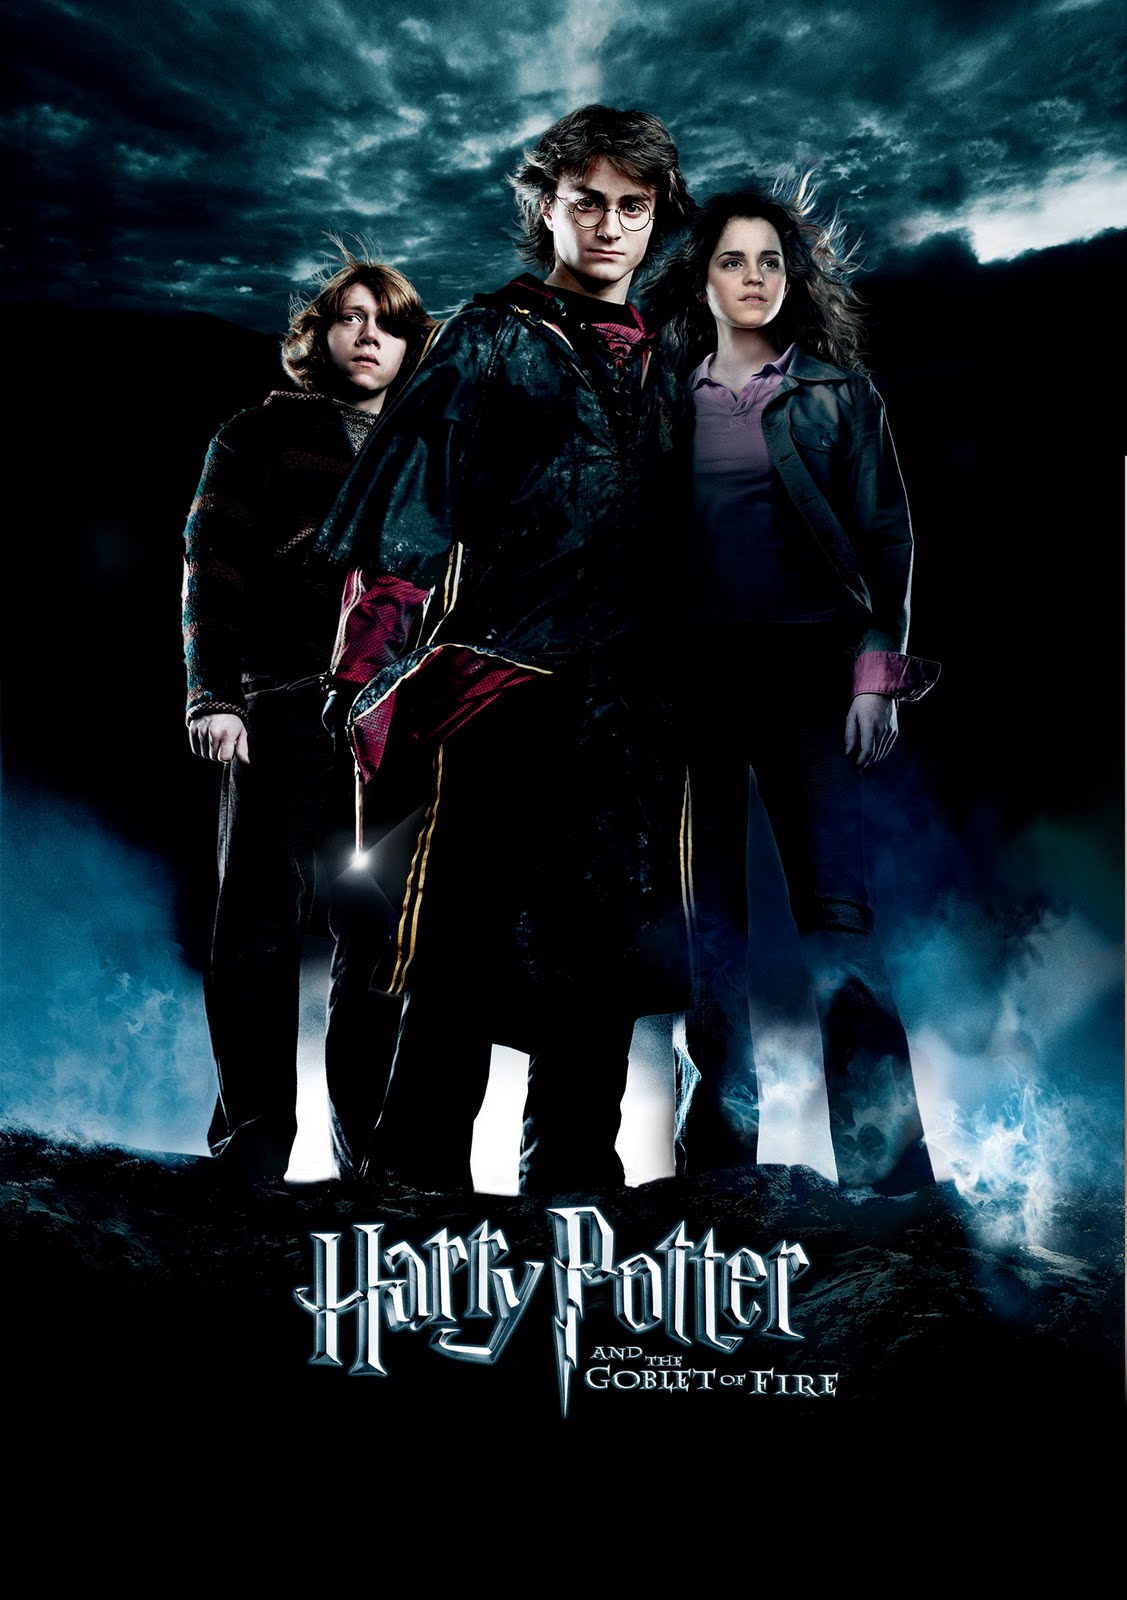 Harry_Potter_and_the_Goblet_of_Fire_1_1.jpg